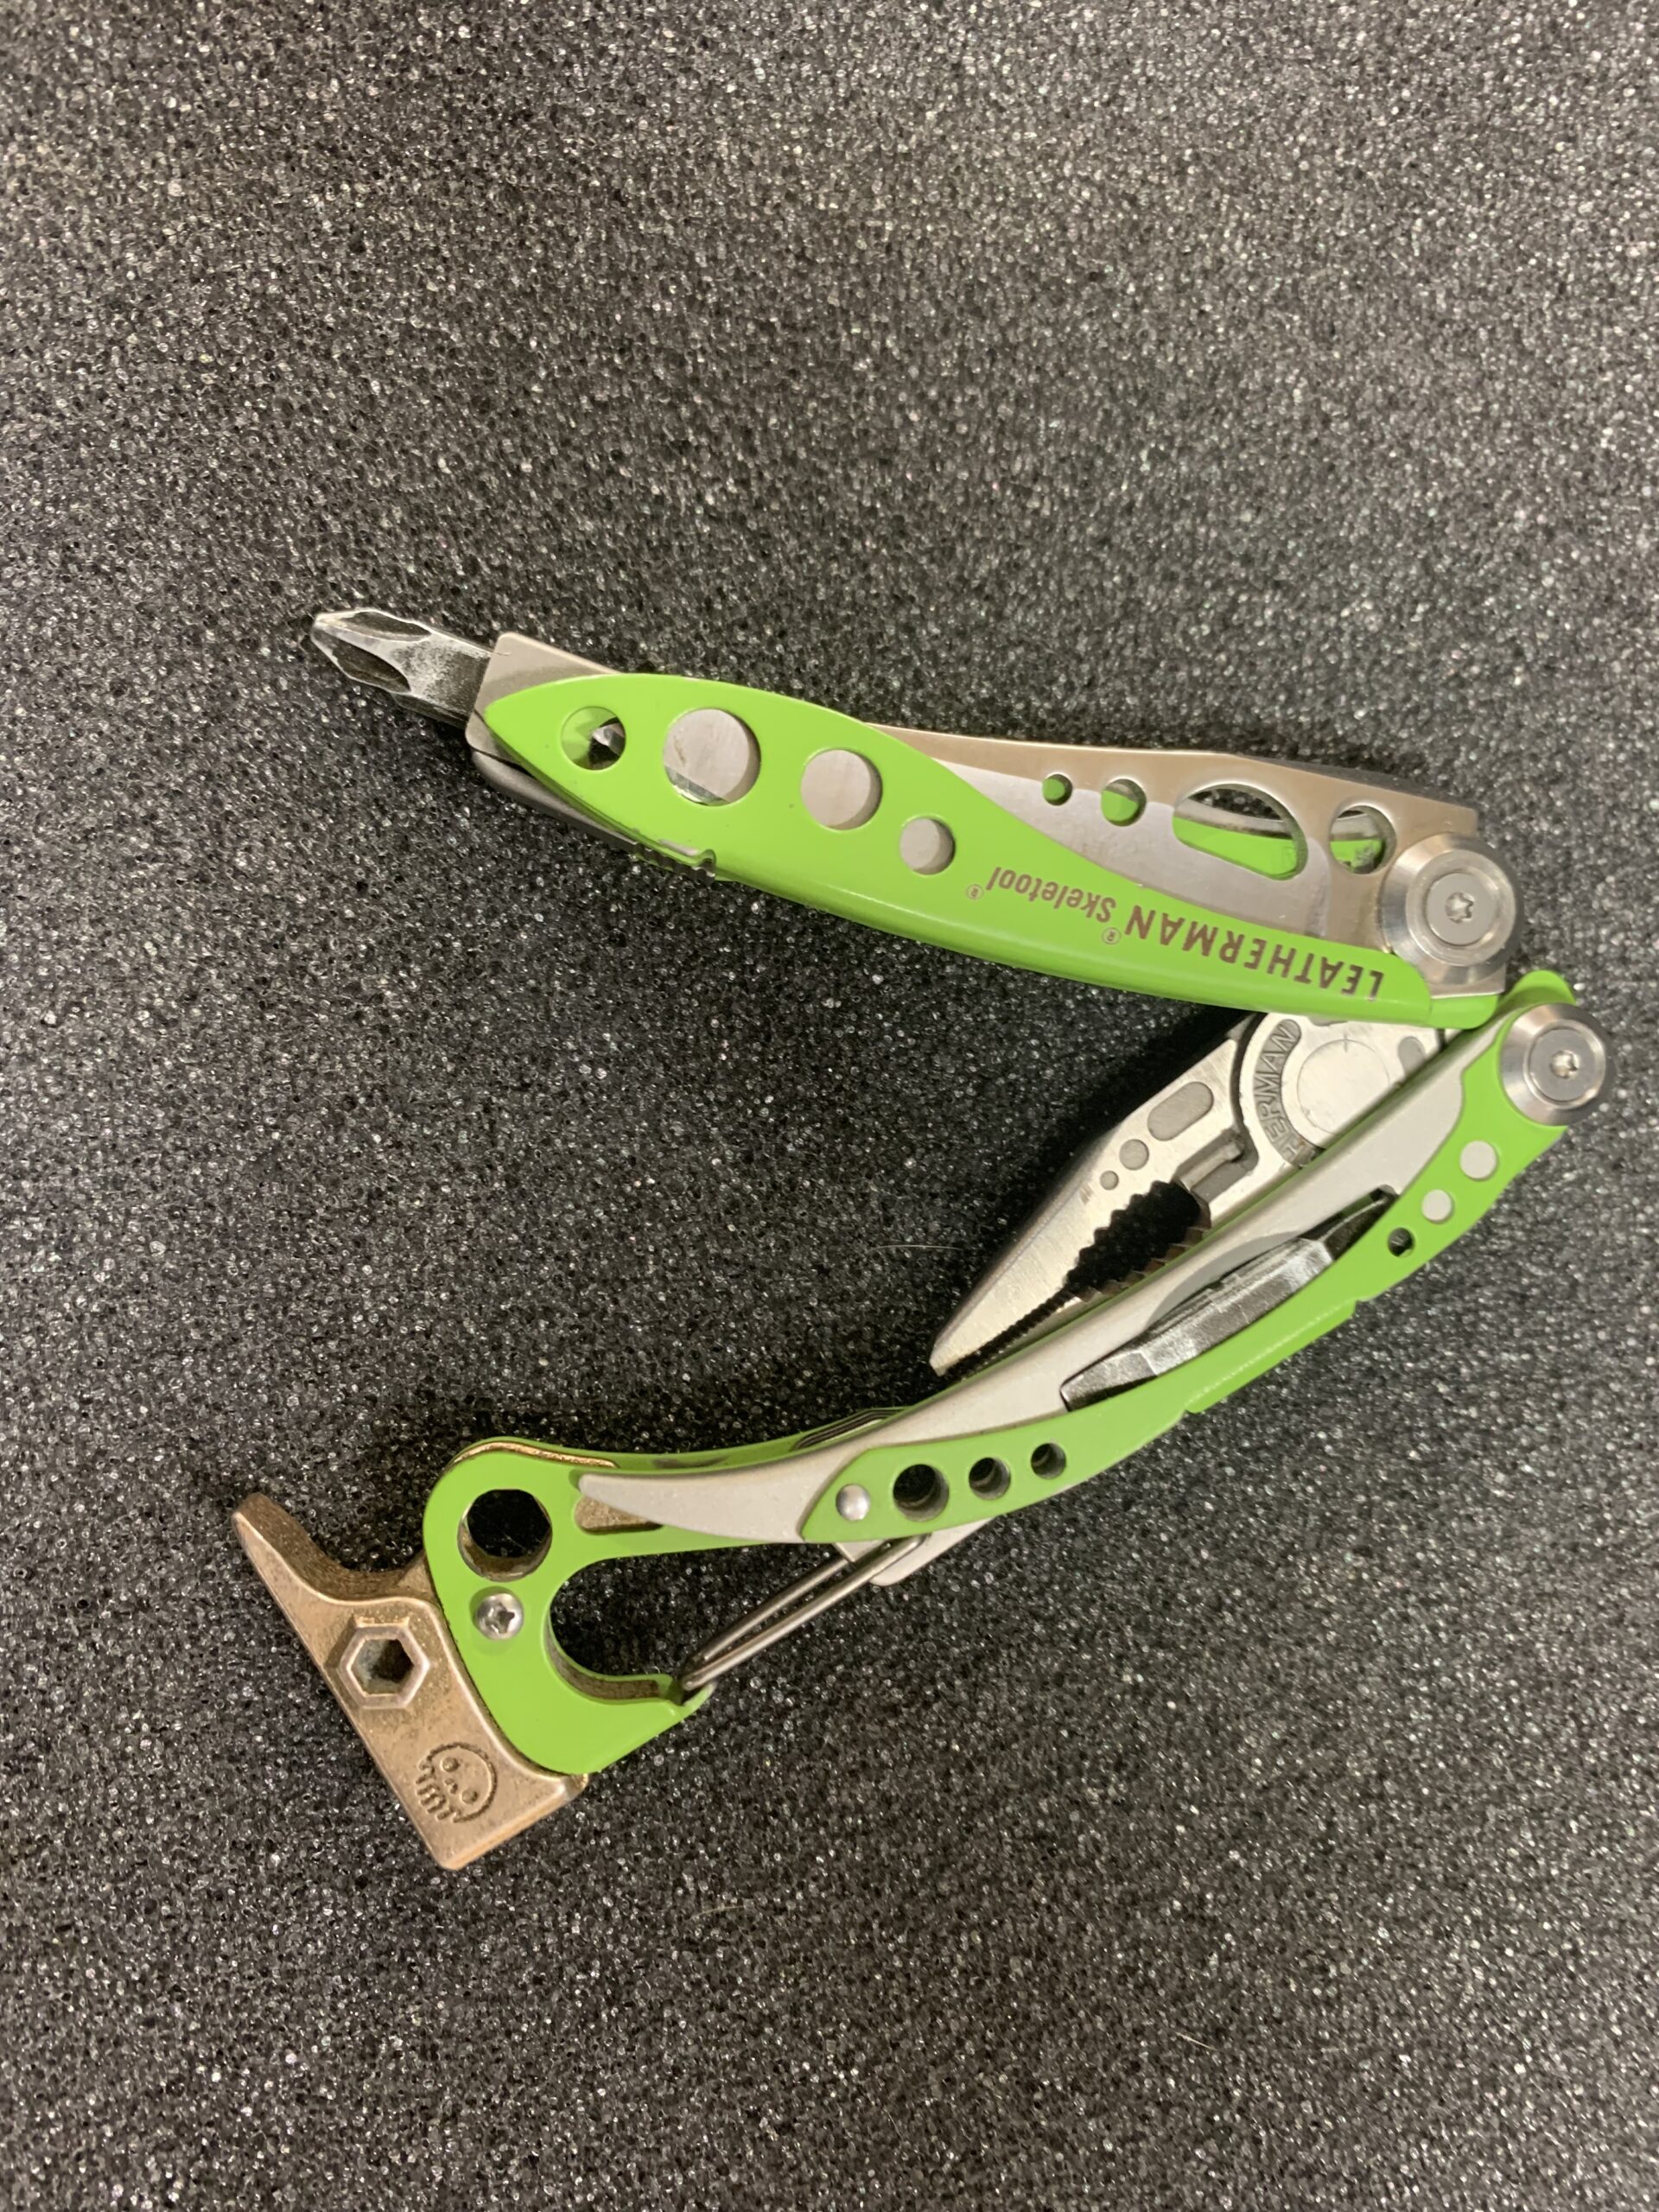 Package Opener Knife Multitool Accessory Leatherman Parts Mod